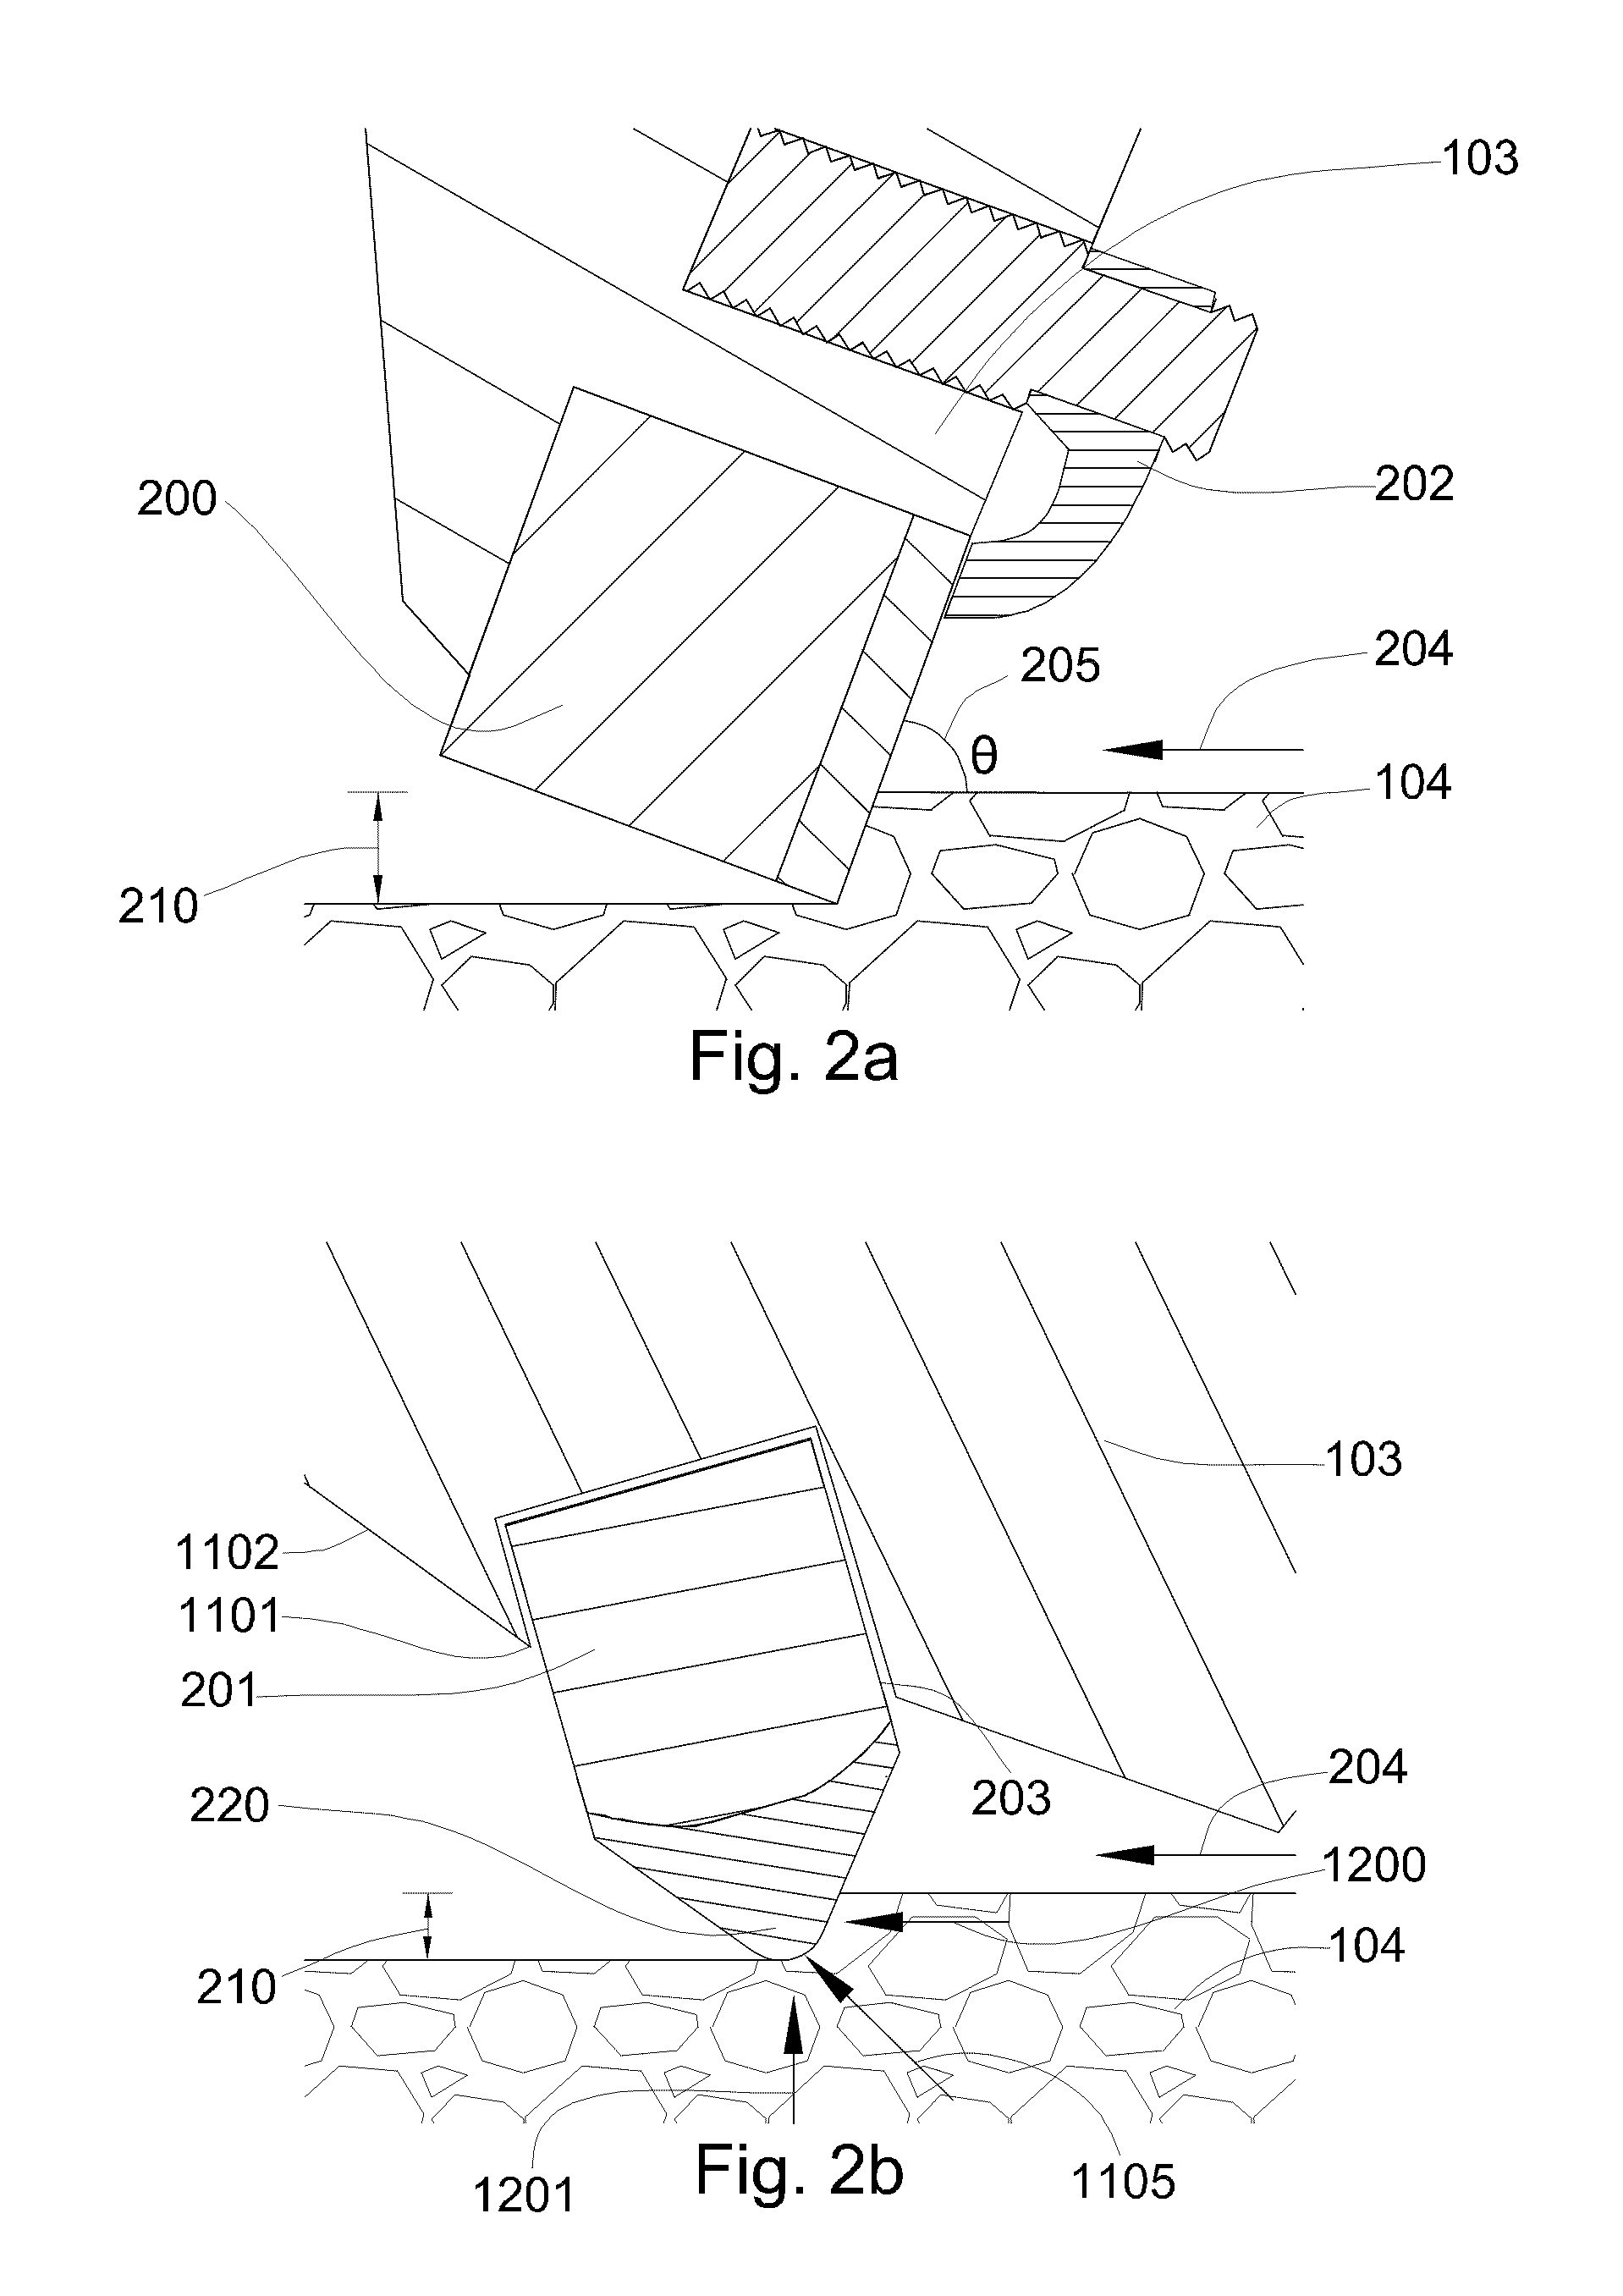 Test fixture that positions a cutting element at a positive rake angle